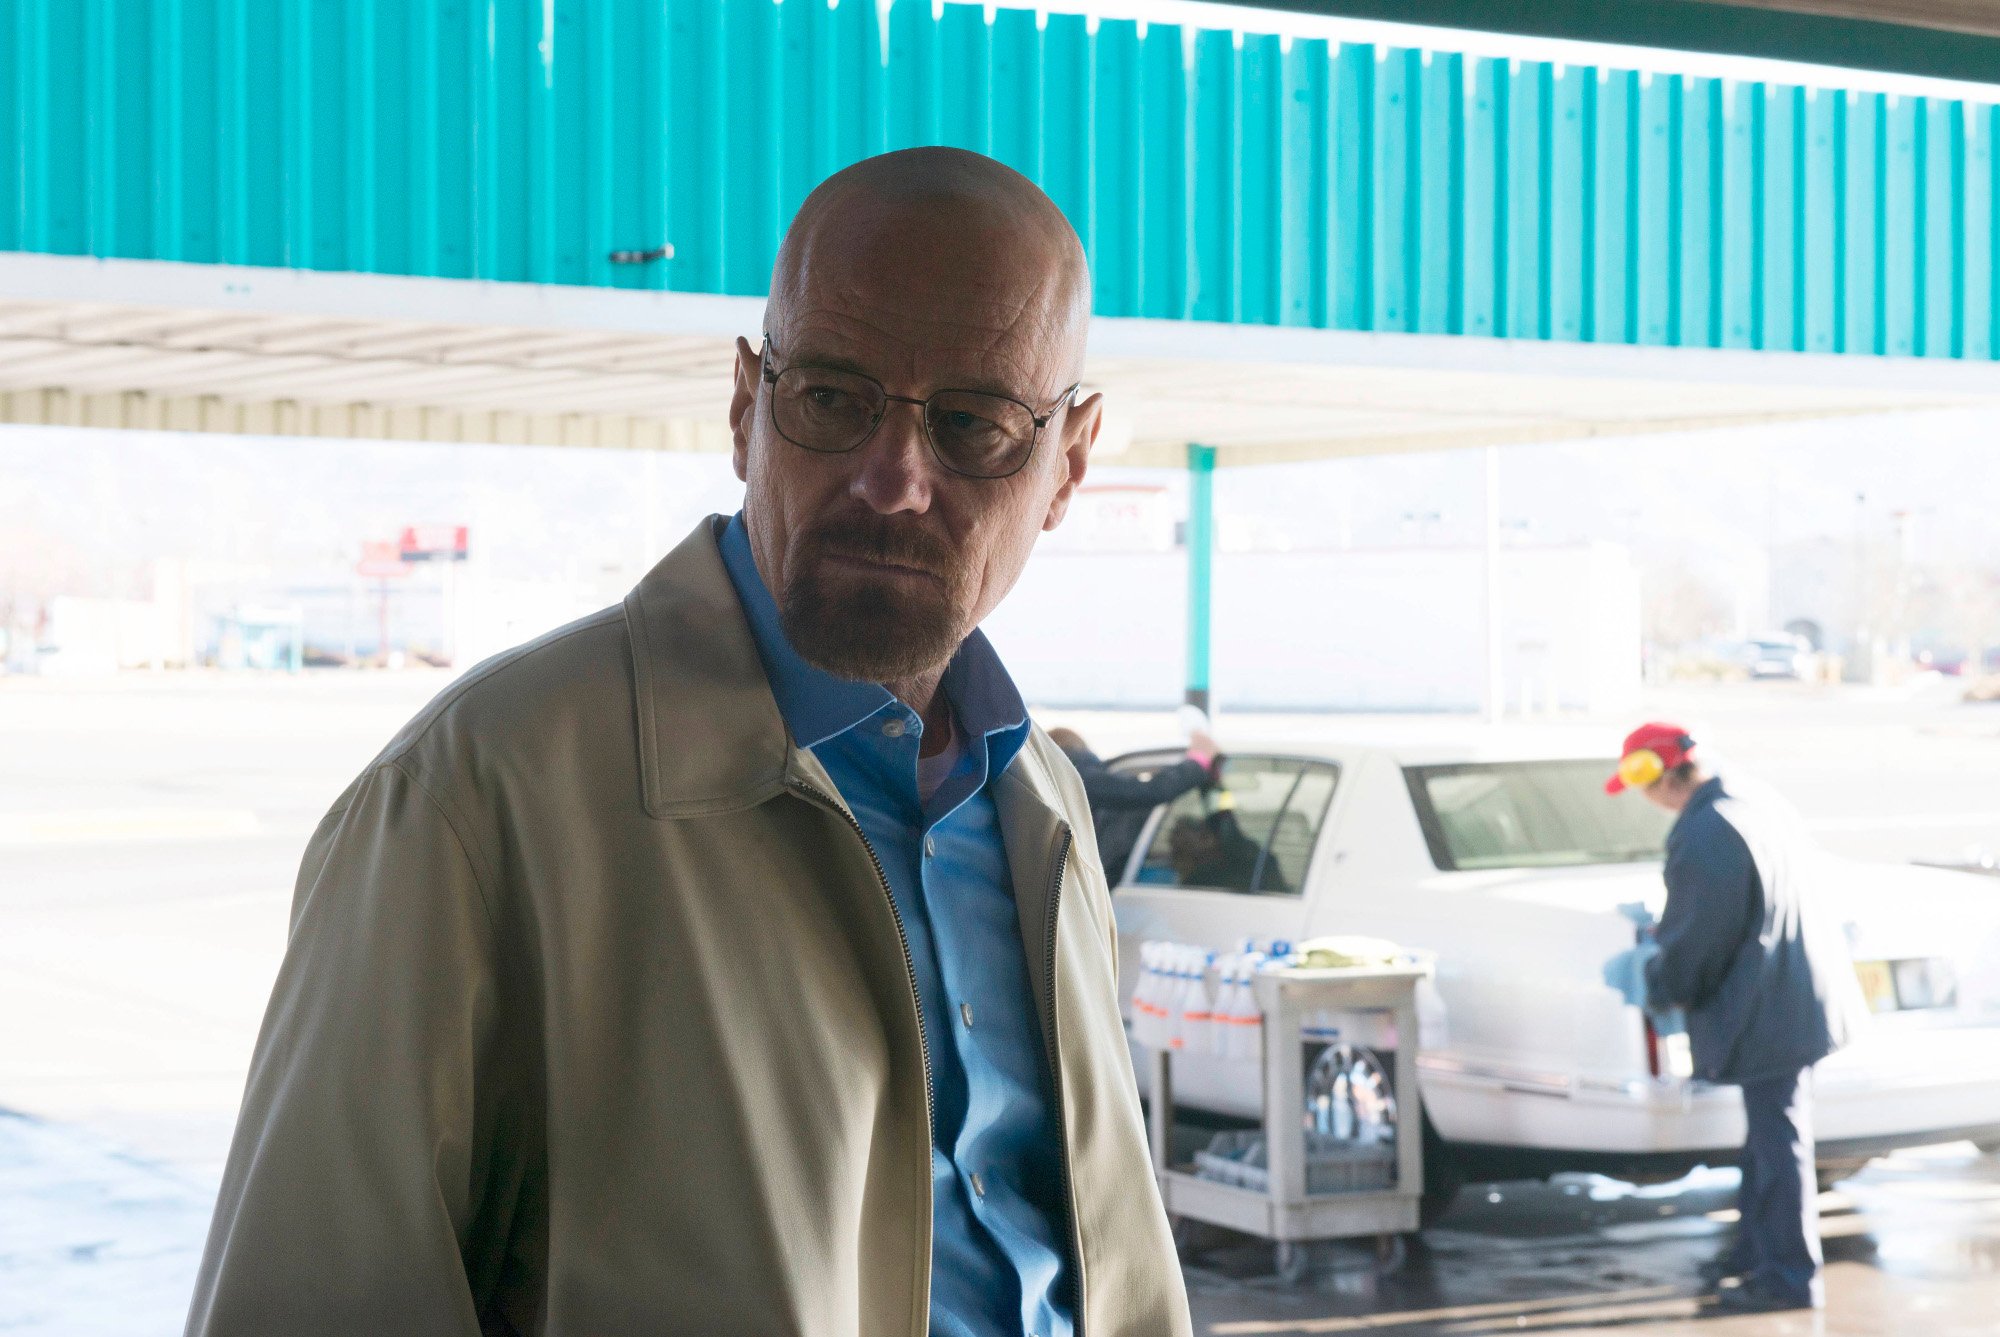 Bryan Cranston as Walter White in AMC's 'Breaking Bad.' He's wearing a blue, button-up shirt and beige jacket and looks angry.